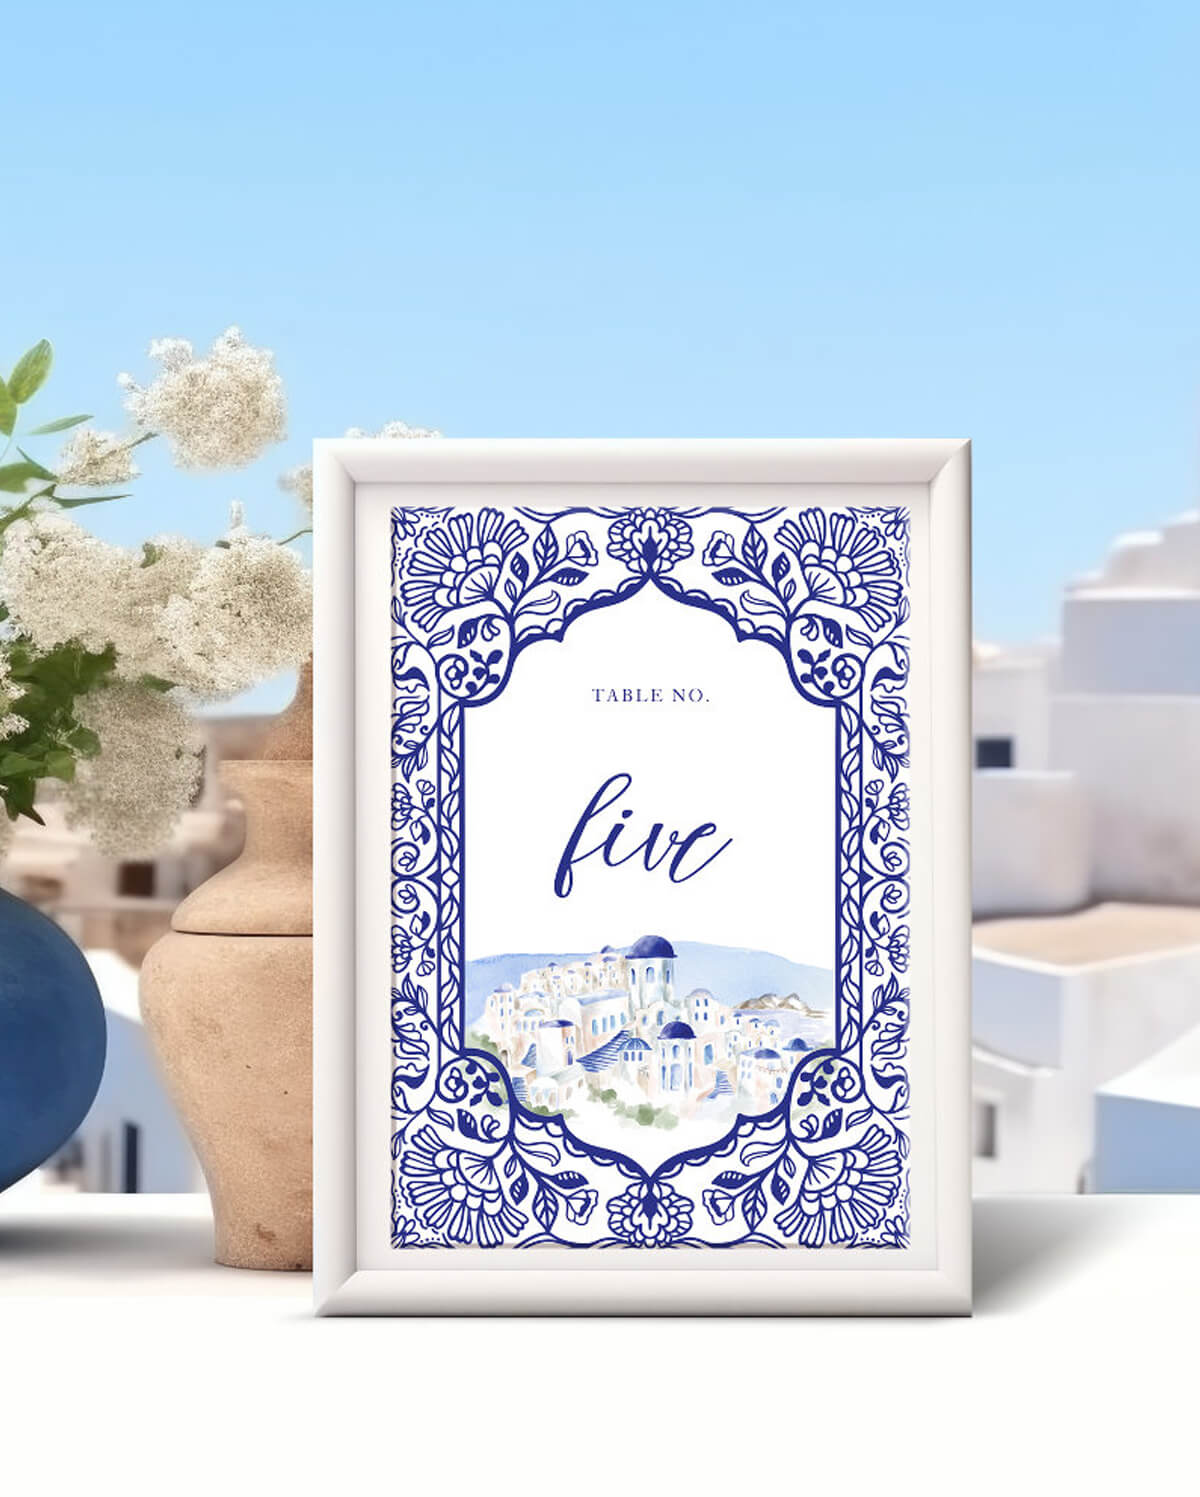 Dream Destination Greece Wedding Table Number By Moodthology Papery